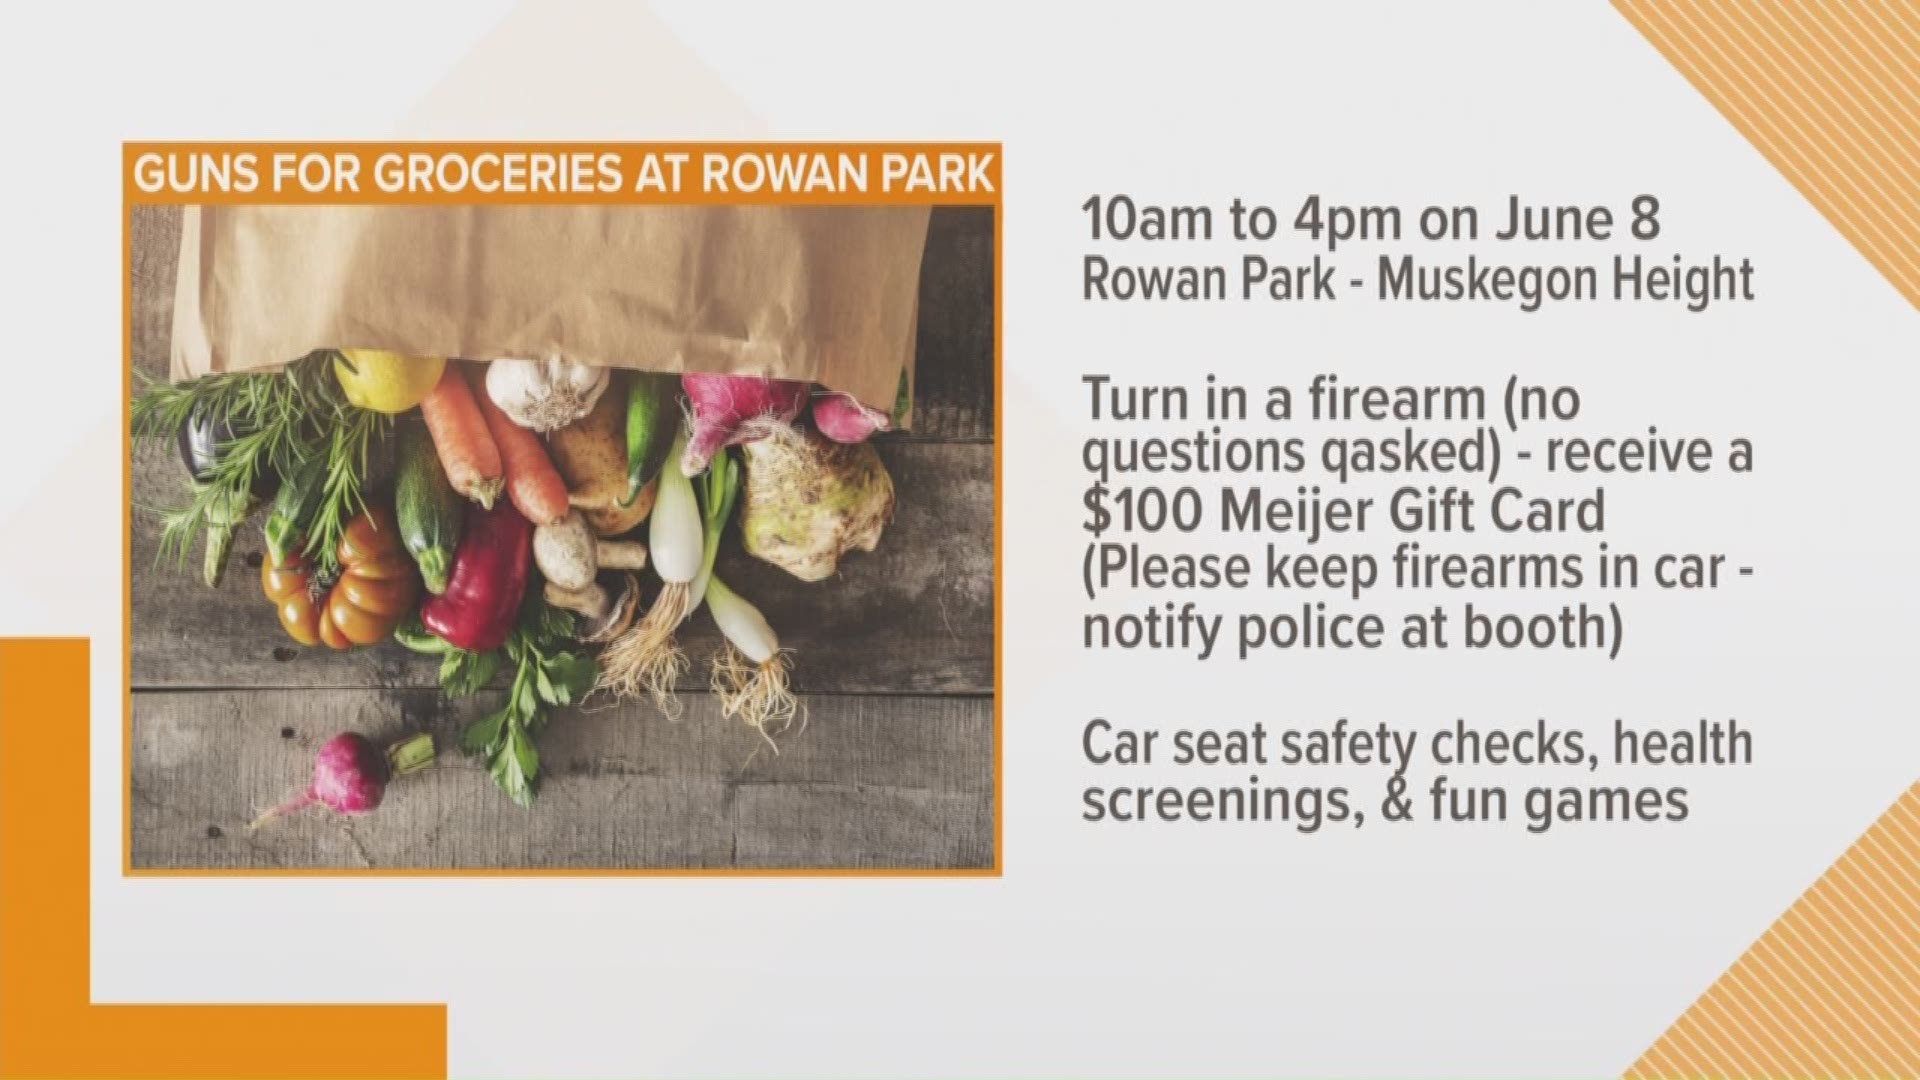 The City is hosting its first ever Guns for Groceries Community Health and Safety Day. It will be taking place on June 8 from 10 a.m. until 4 p.m. at Rowan Park.